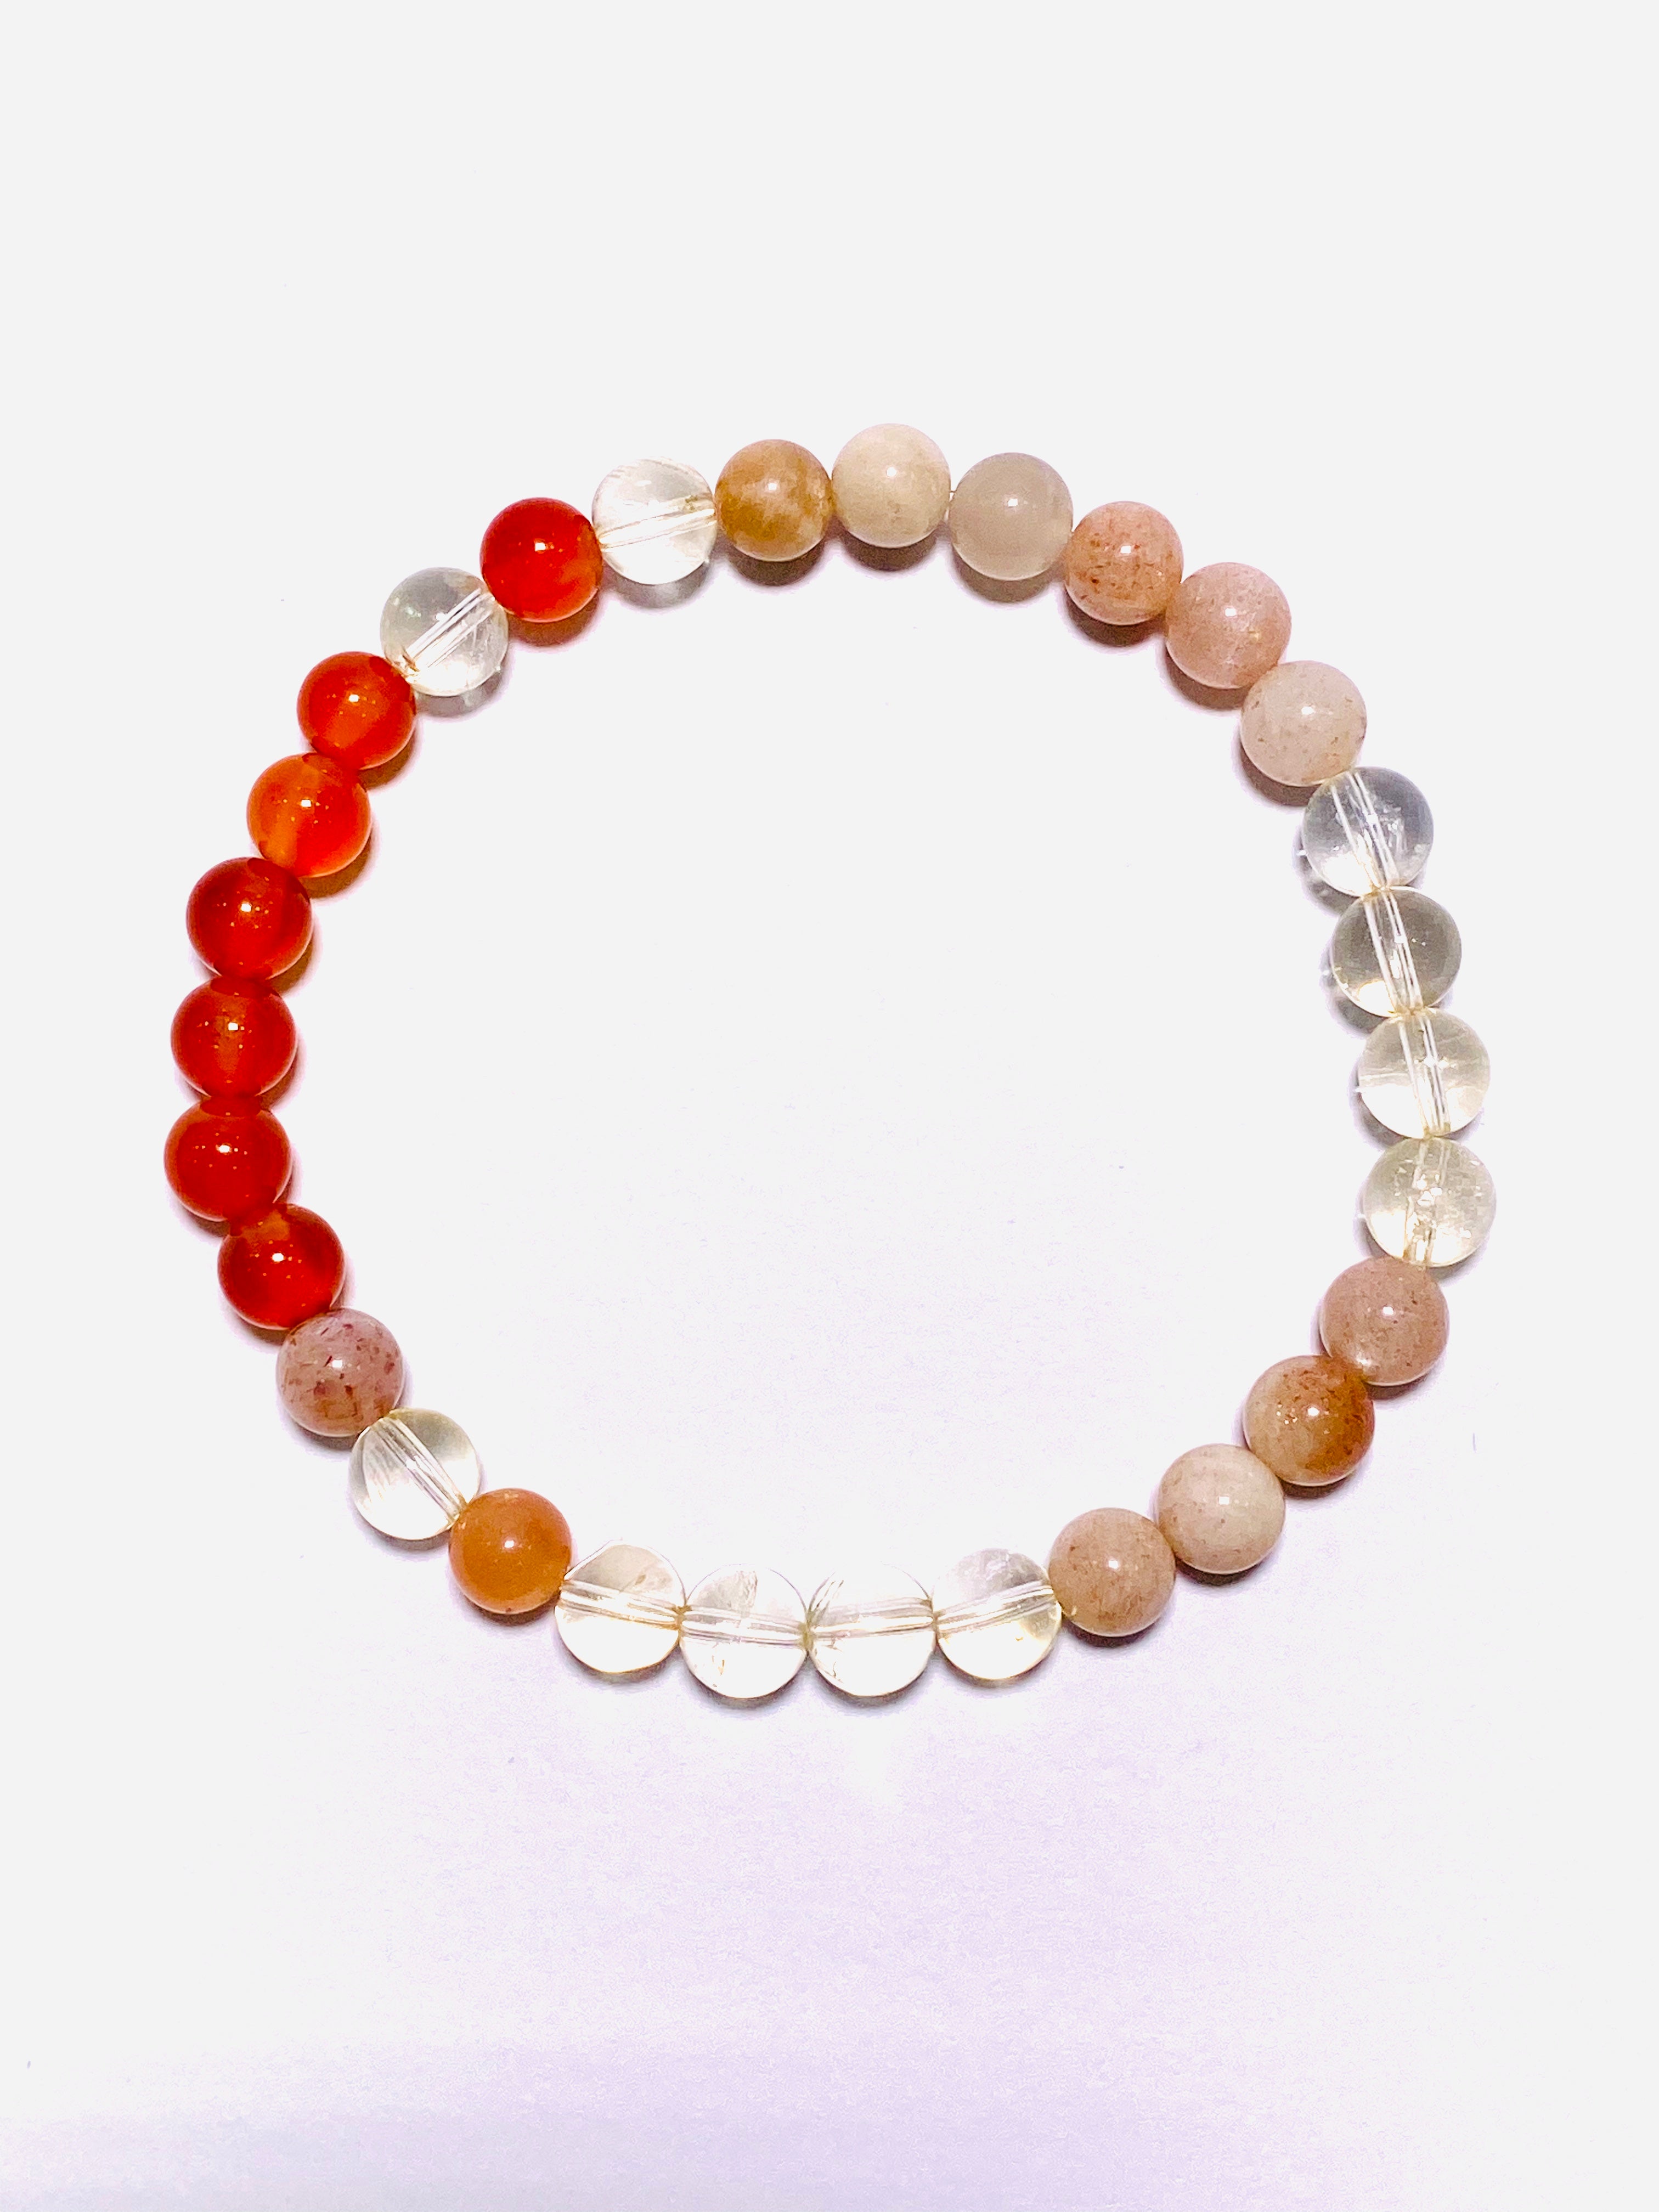 Buy GelConnie Lava Rock Chakra Bracelet 7 Chakra 8mm Natural Stone Healing  Bracelet Stress Relief Yoga Beads Anxiety Bracelet Aromatherapy Essential  Oil Diffuser Bracelet Bangle at Amazon.in